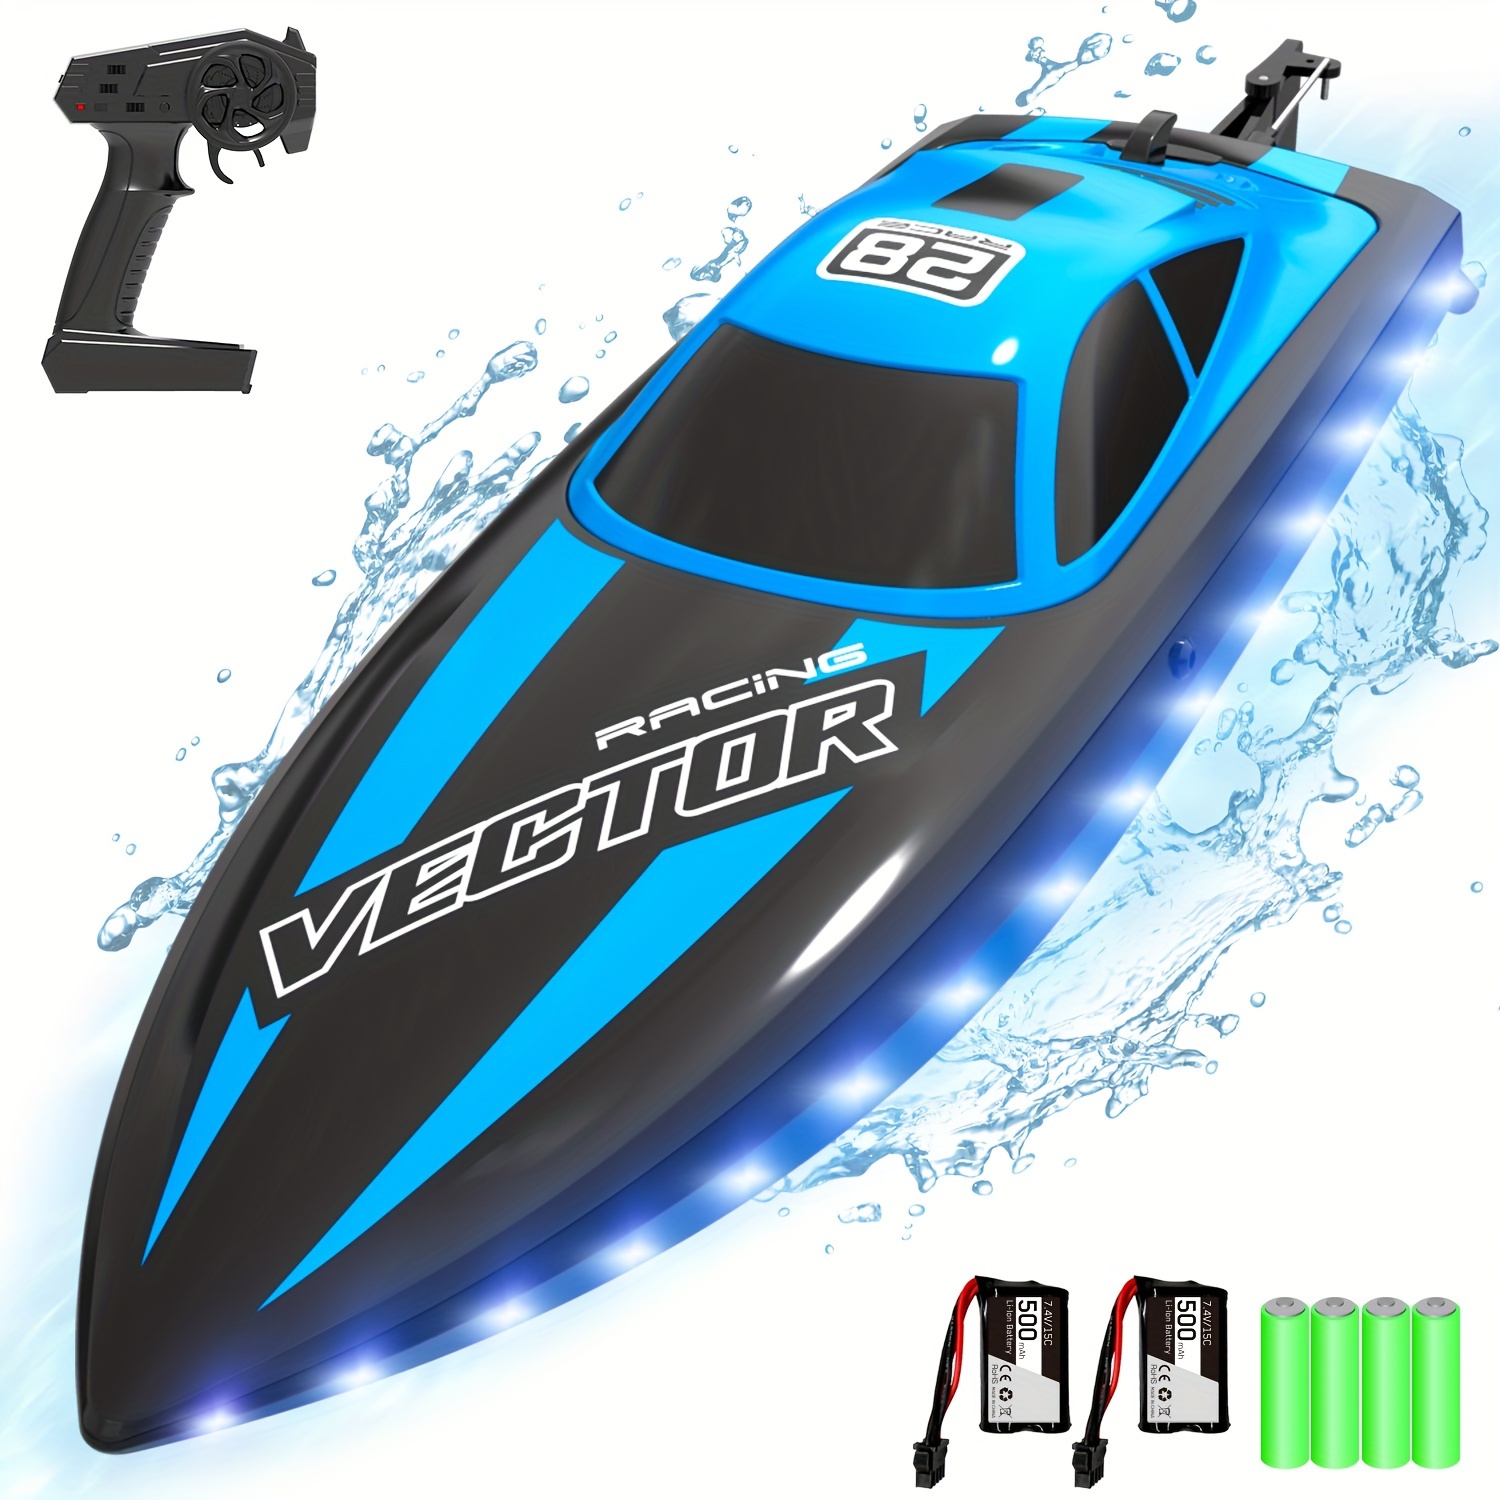 

Volantexrc Rc Boat 20mph Fast Remote Control Boat With Lights 2.4ghz Toy Boat For Pools And Lakes With 2 Rechargeable Batteries Toys For Boys Girls, Blue Christmas Gifts